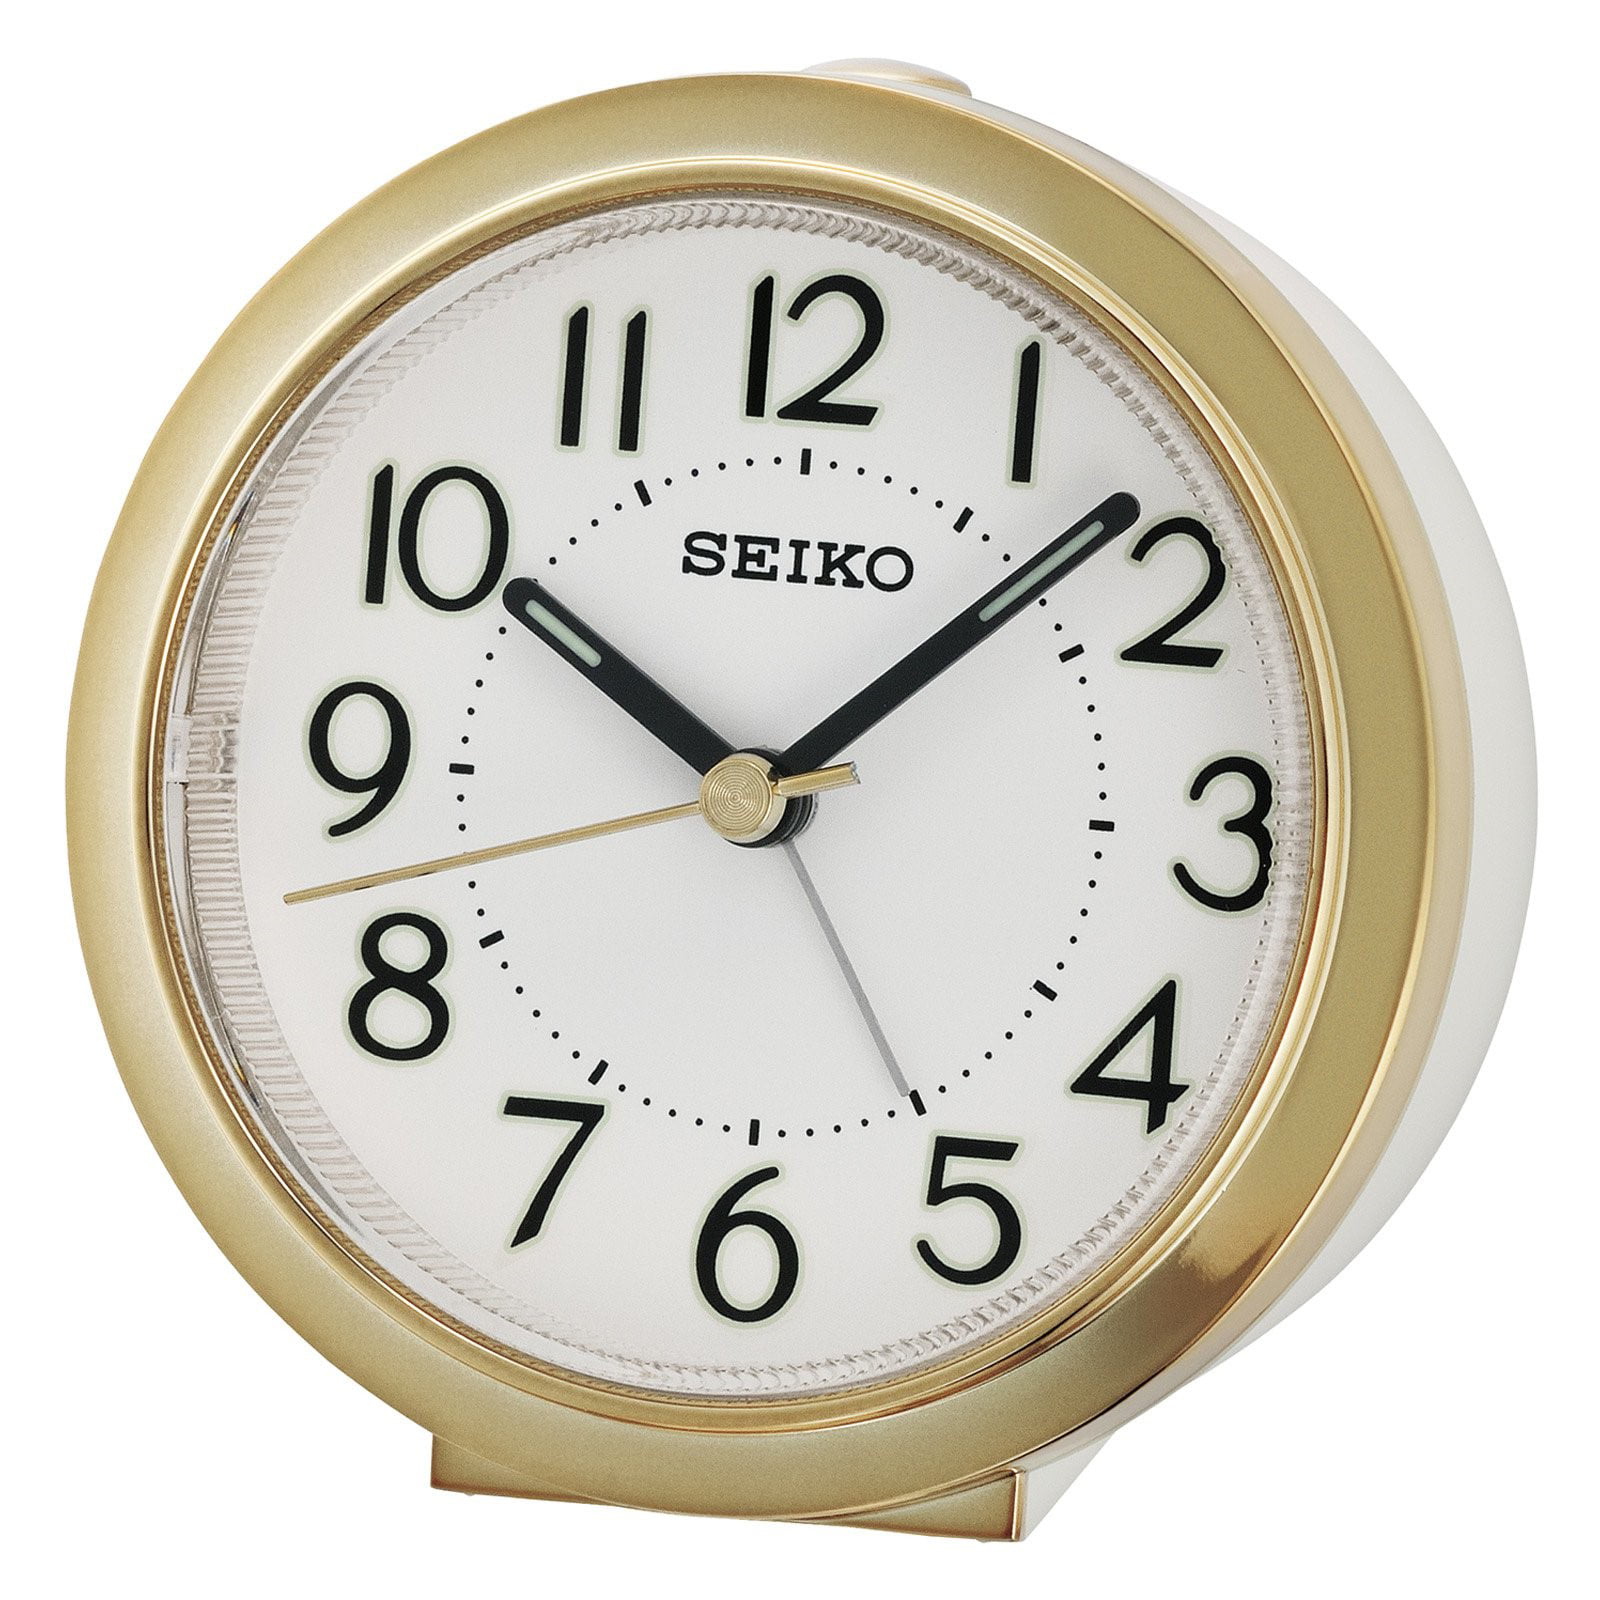 Seiko White Alarm Clock Large Numerals Silver Trim Snooze Function Silent Gift 